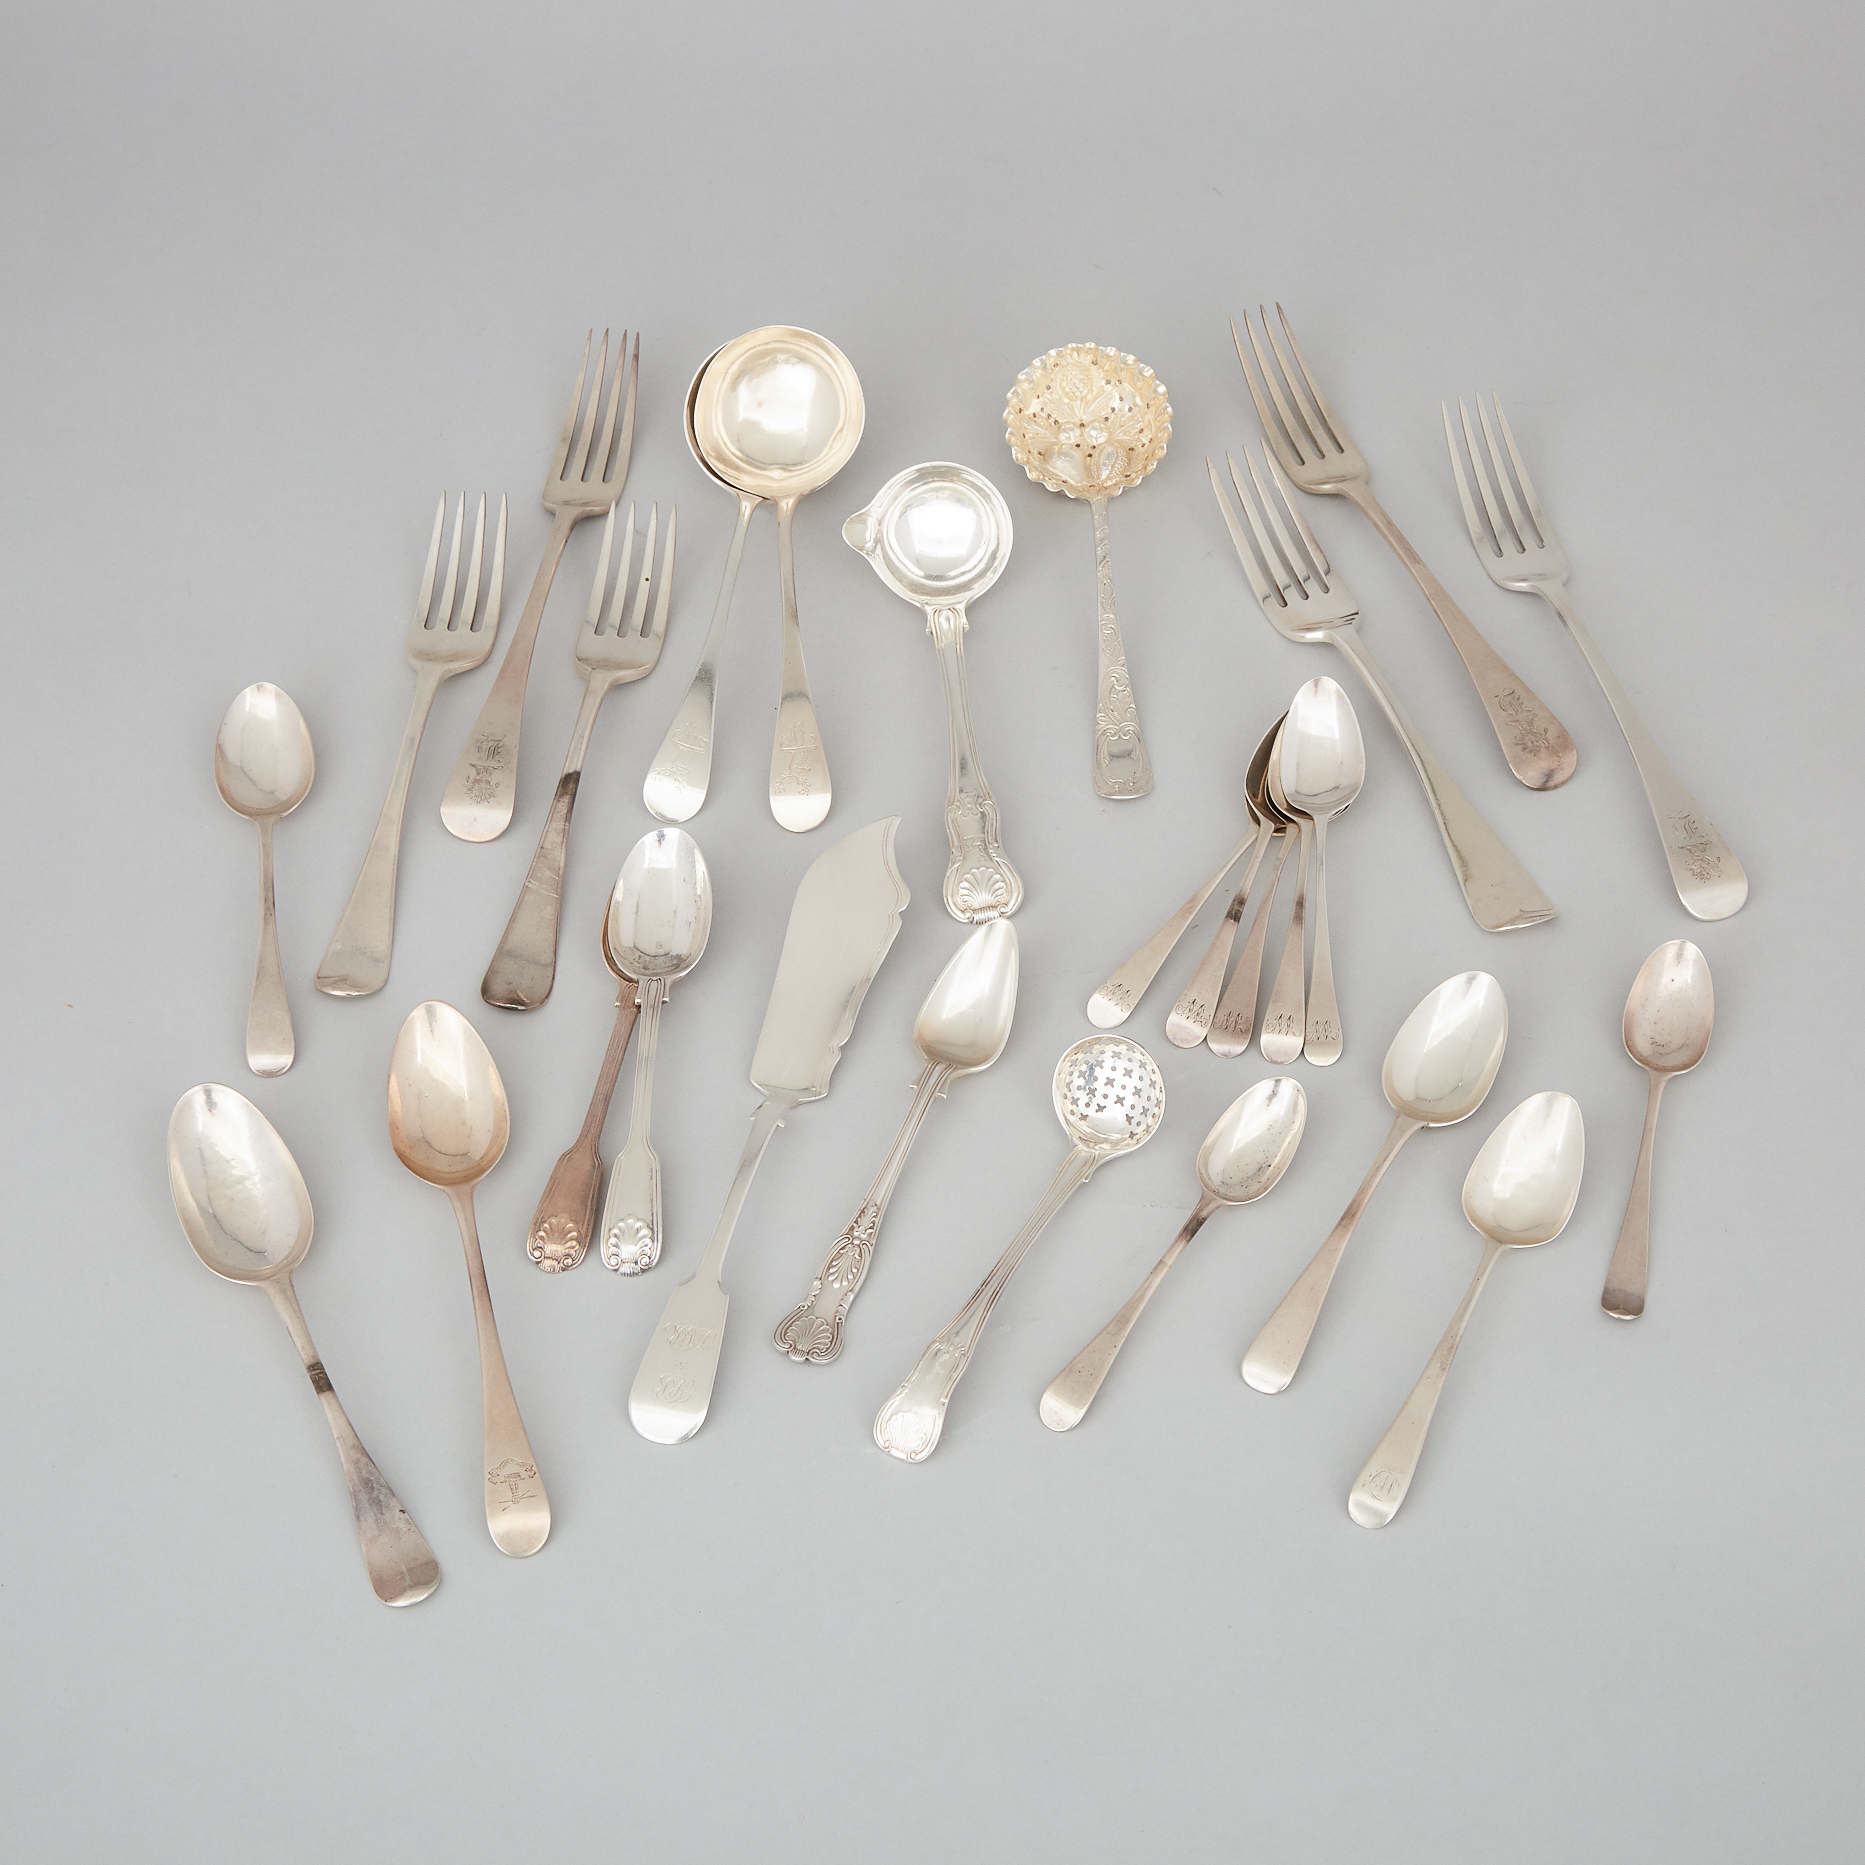 Group of Georgian and Victorian Silver Flatware, 18th/19th century